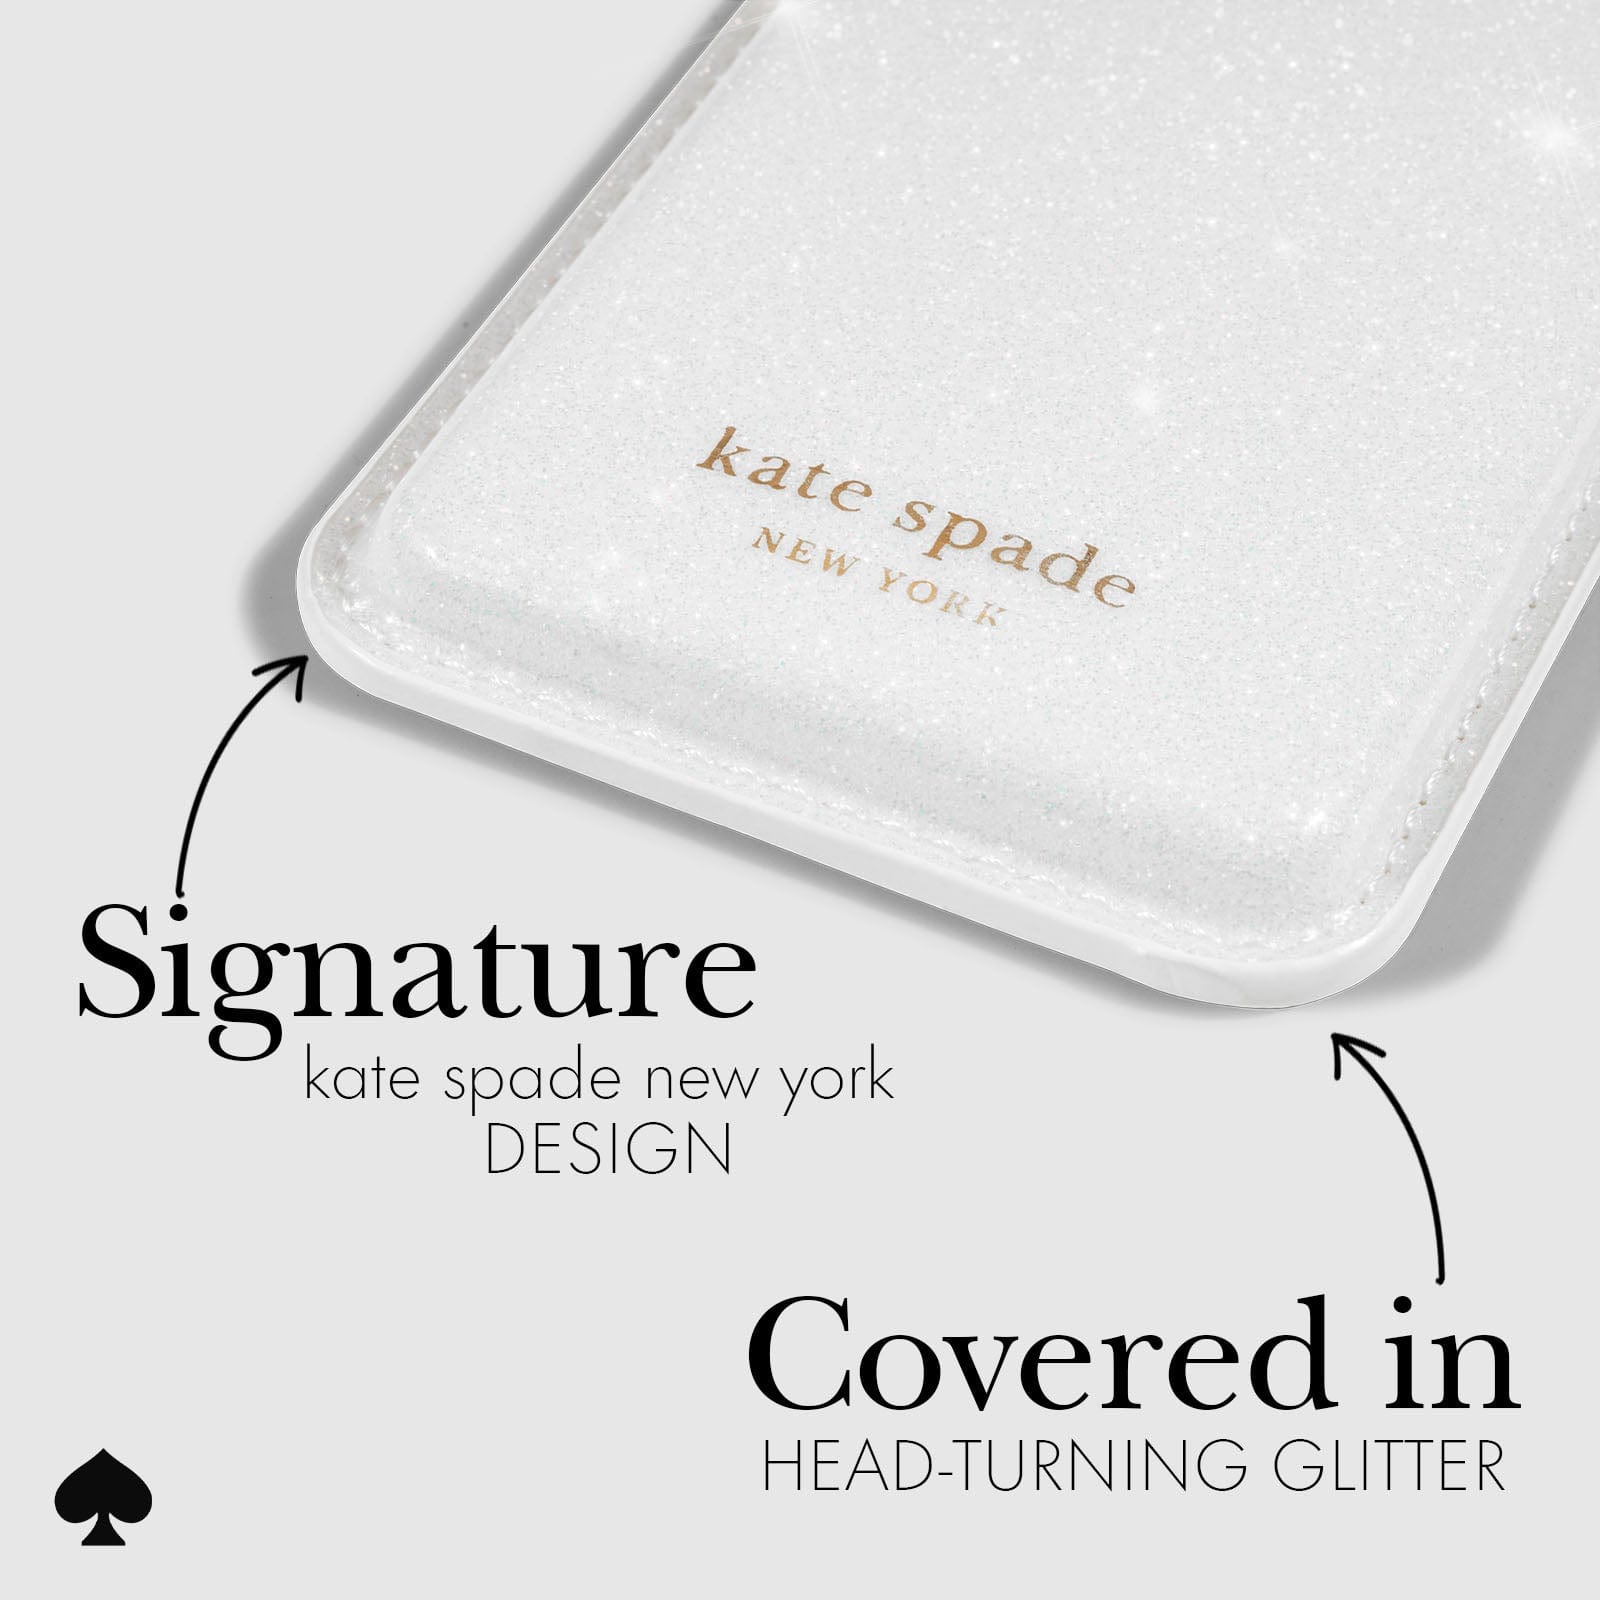 SIGNATURE KATE SPADE NEW YORK DESIGN. COVERED IN HEAD TURNING GLITTER